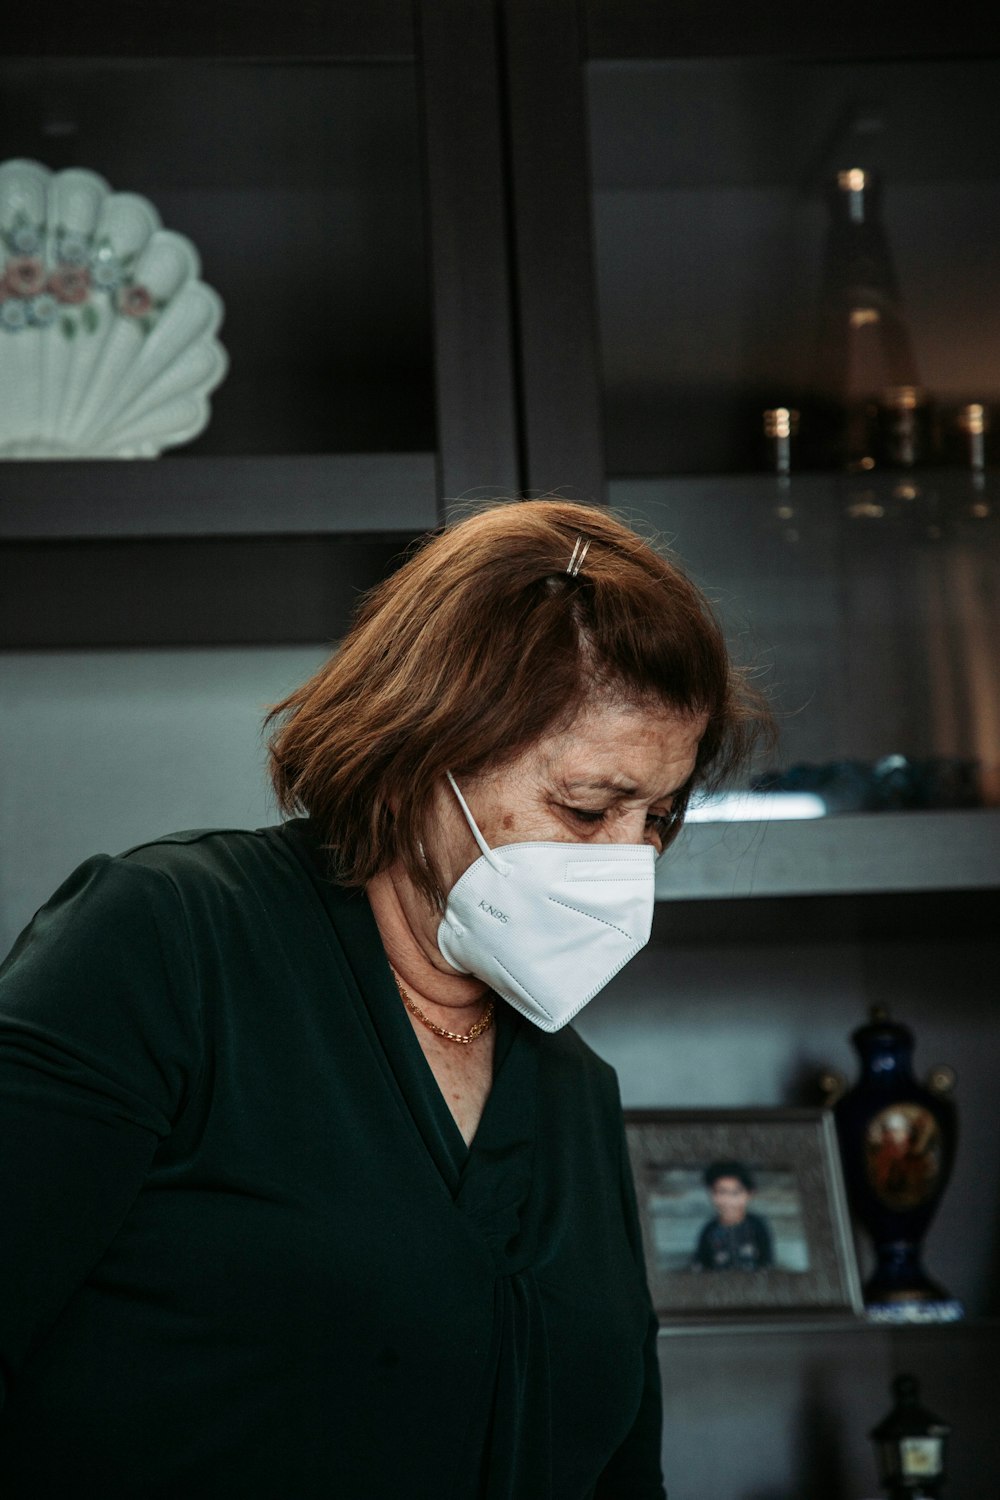 a woman wearing a face mask in a kitchen